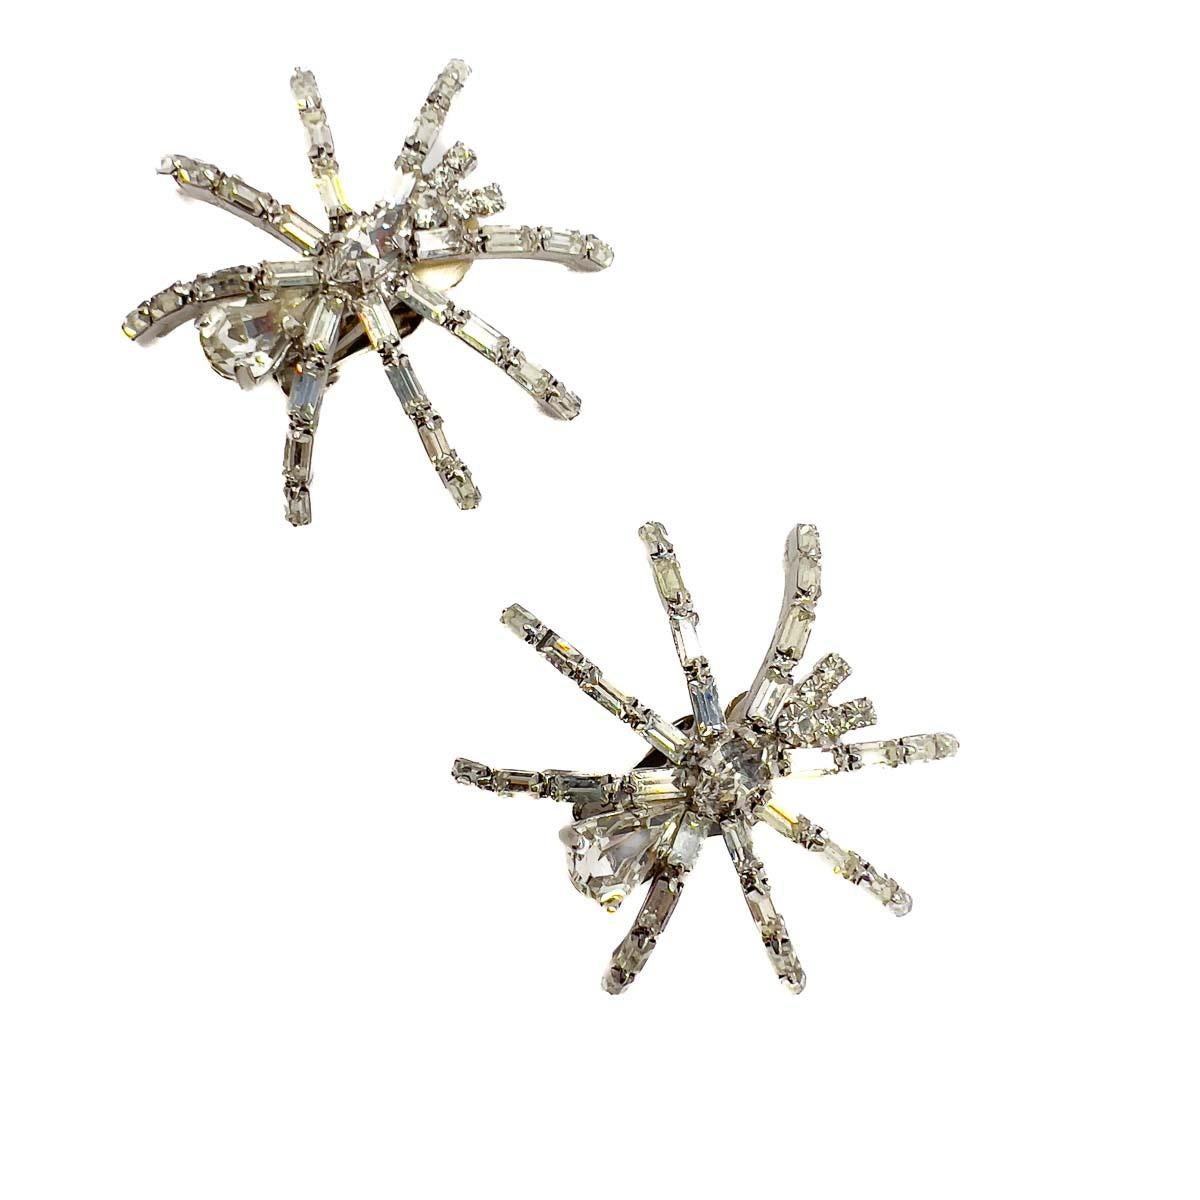 A super-cool pair of Vintage Butler & Wilson Spider Earrings. The spider, one of Butler & Wilson's most iconic styles is perfectly proportioned for the lobe. A brilliant and time immortal style statement that oozes whimsy and sass.
Butler and Wilson